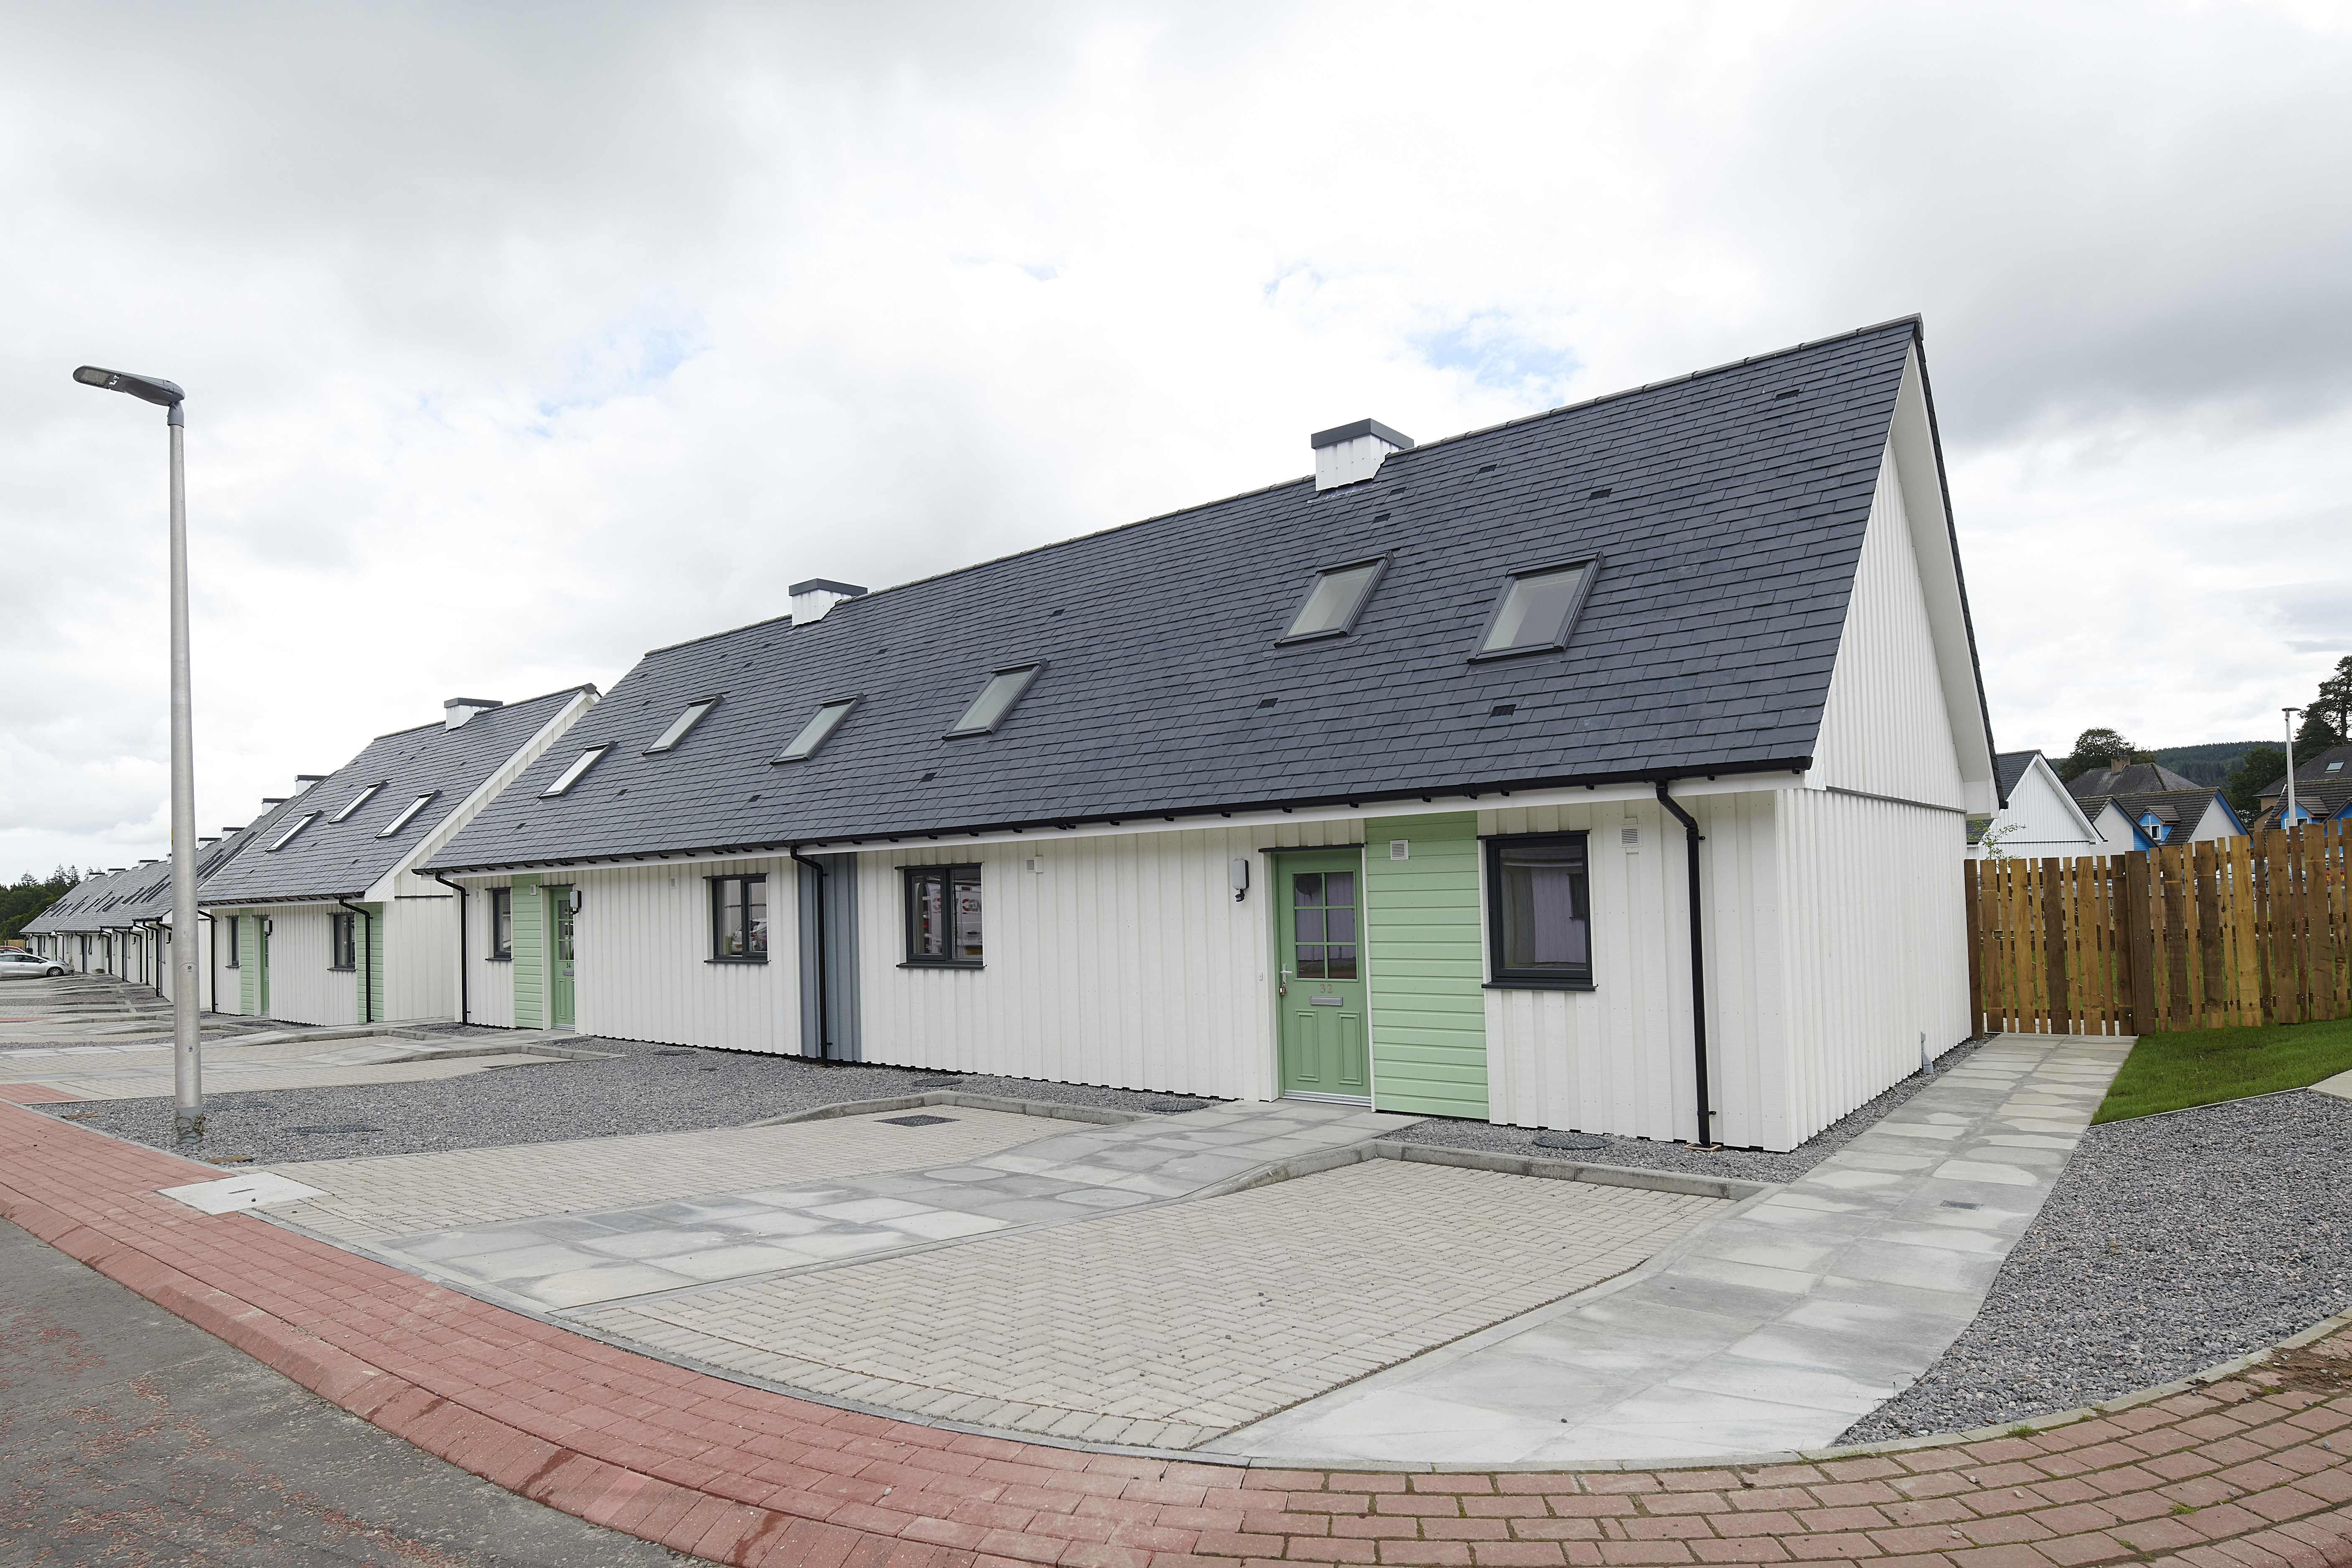 Final phase completed at Highland housing development